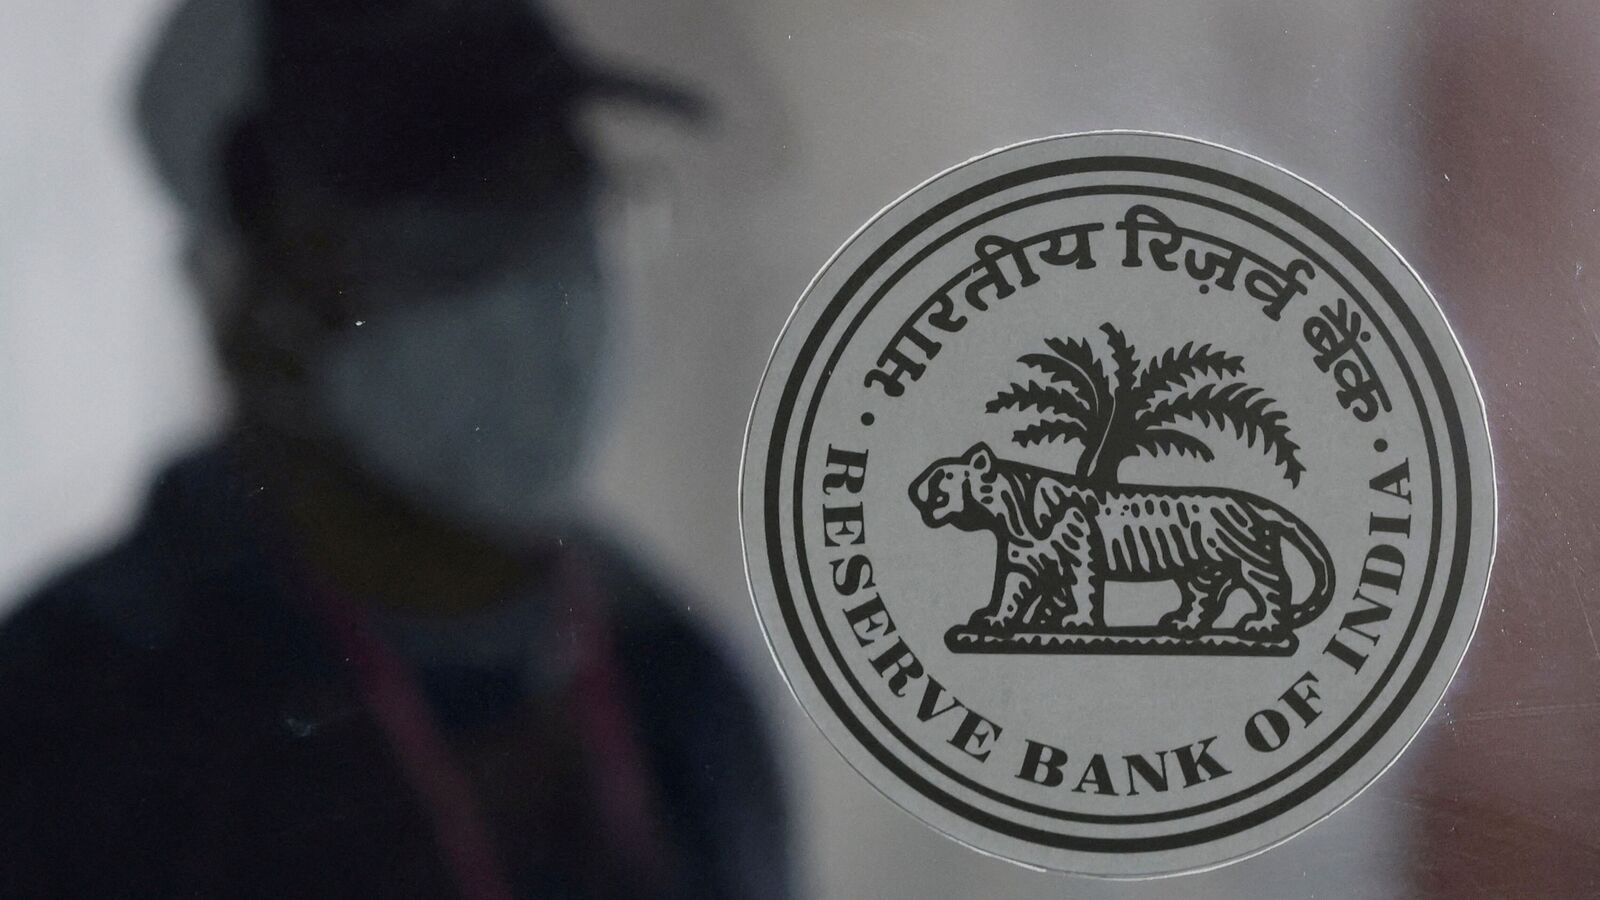 RBI makes addition of 19 unauthorised forex trading platforms in Alert List, check details